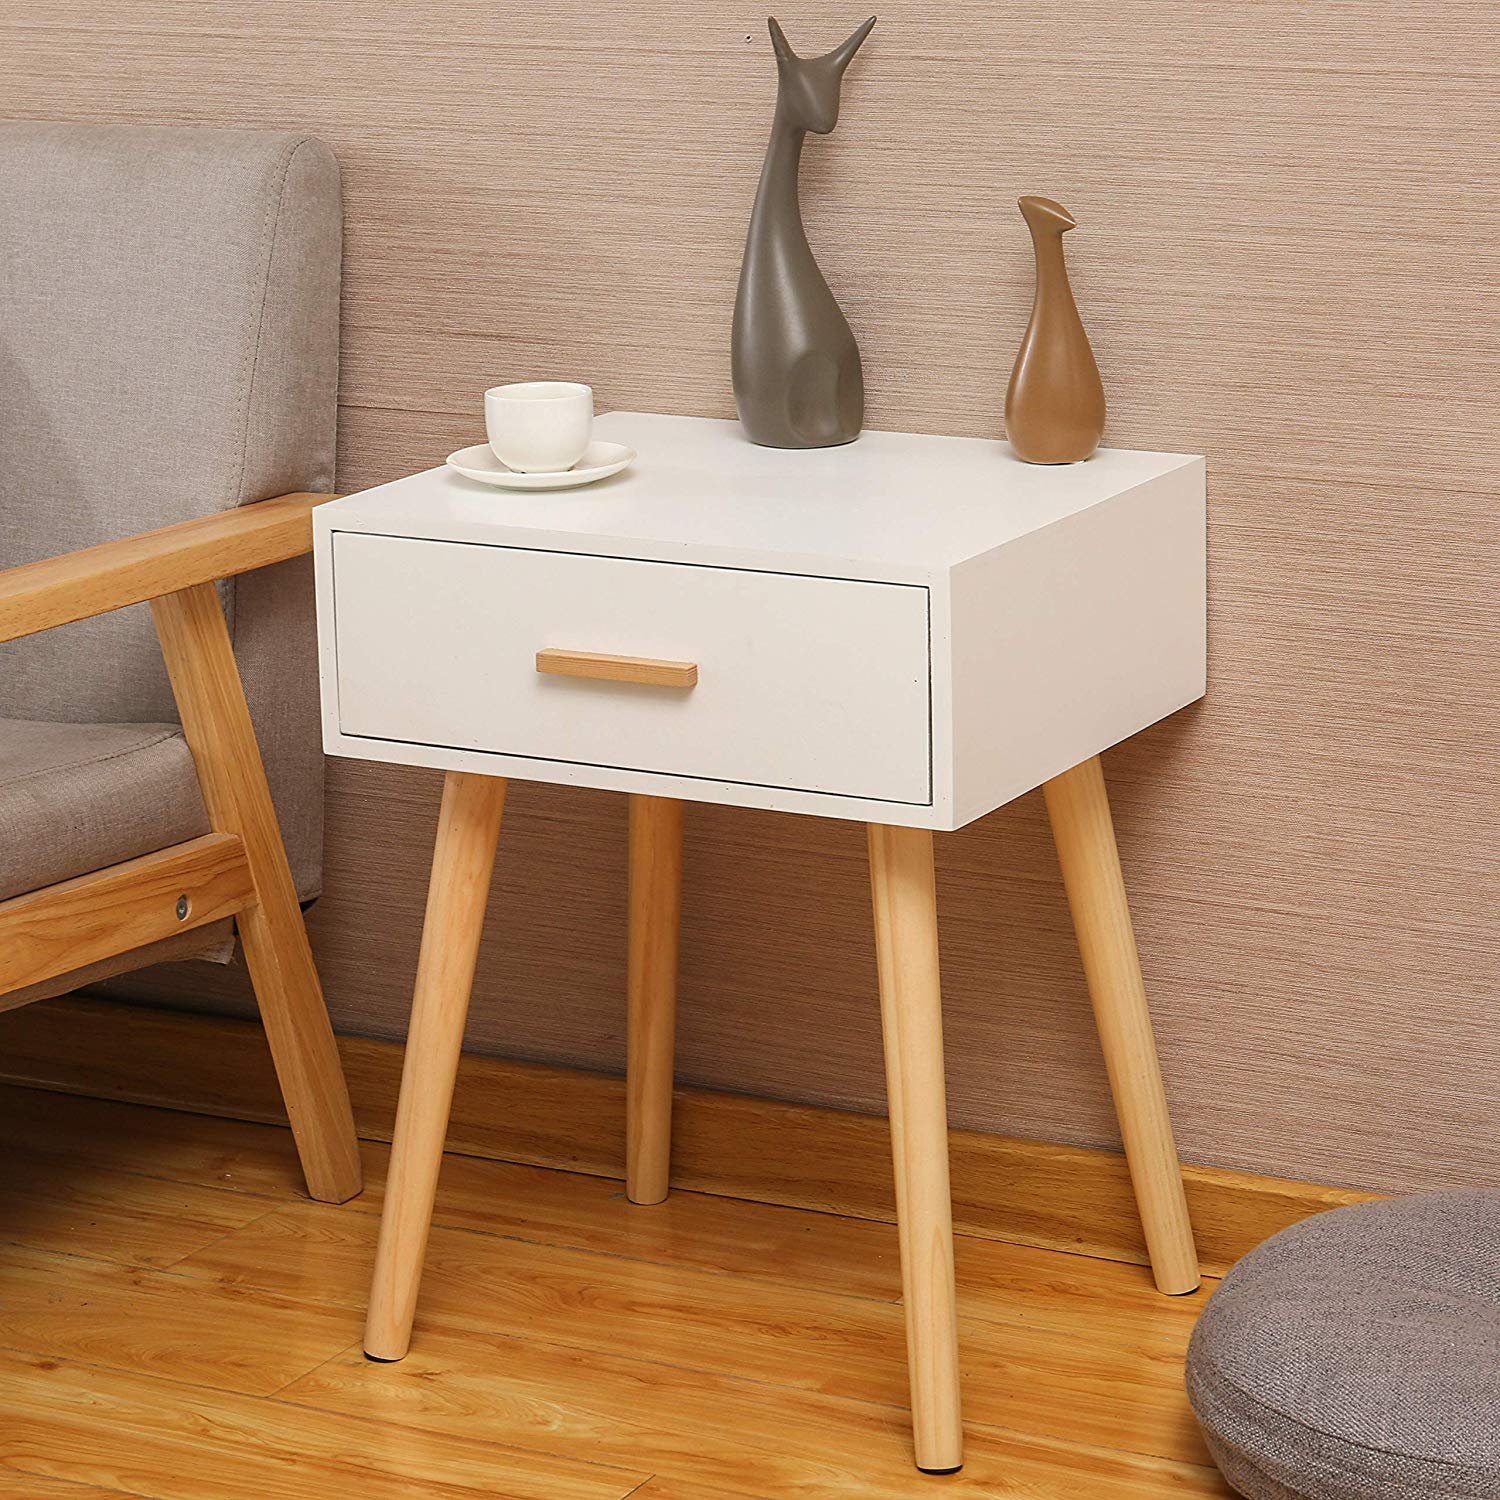 Samos Wooden Bedside Table with Drawer – White